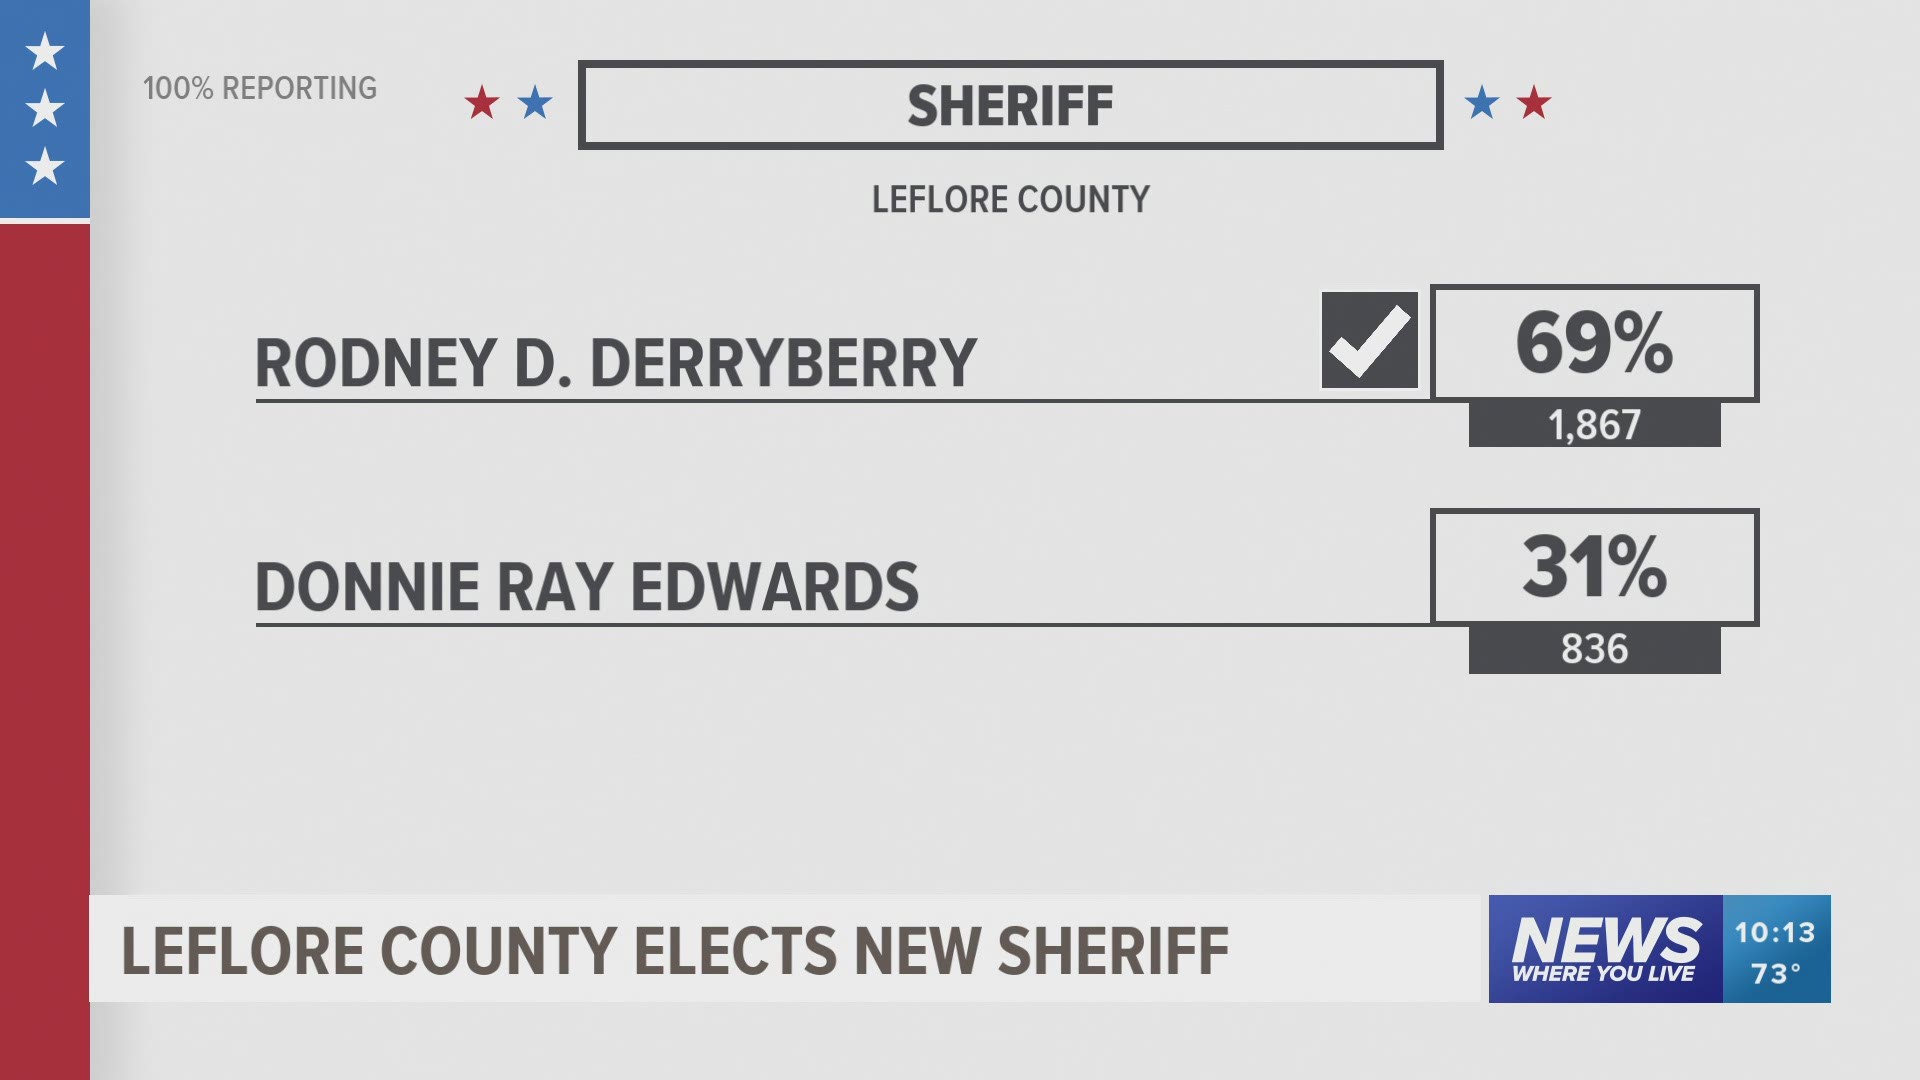 LeFlore County Elects New Sheriff